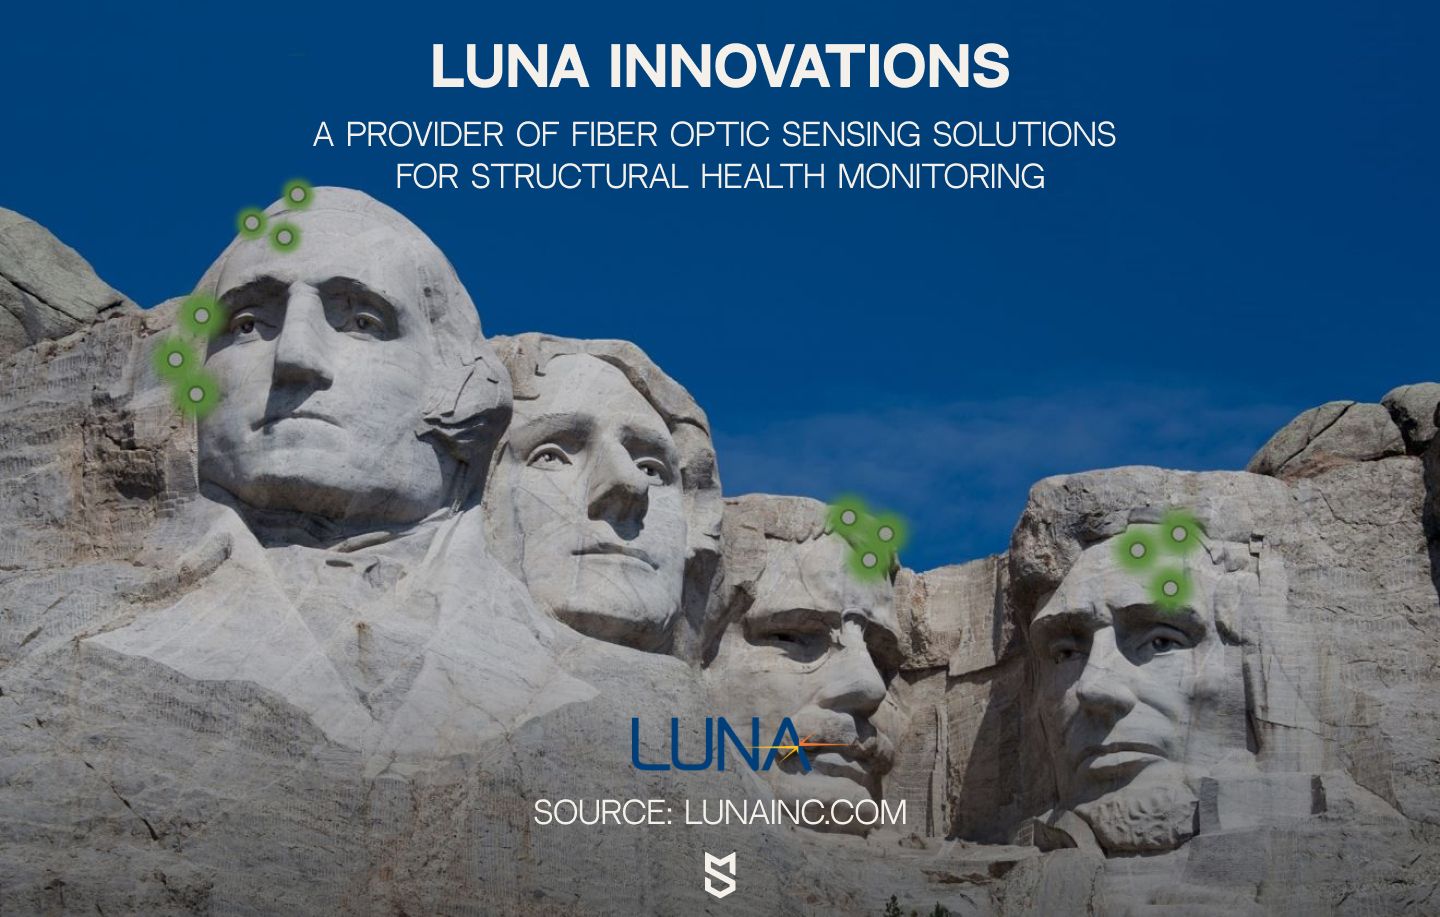 Luna Innovations, a provider of fiber optic sensing solutions for structural health monitoring